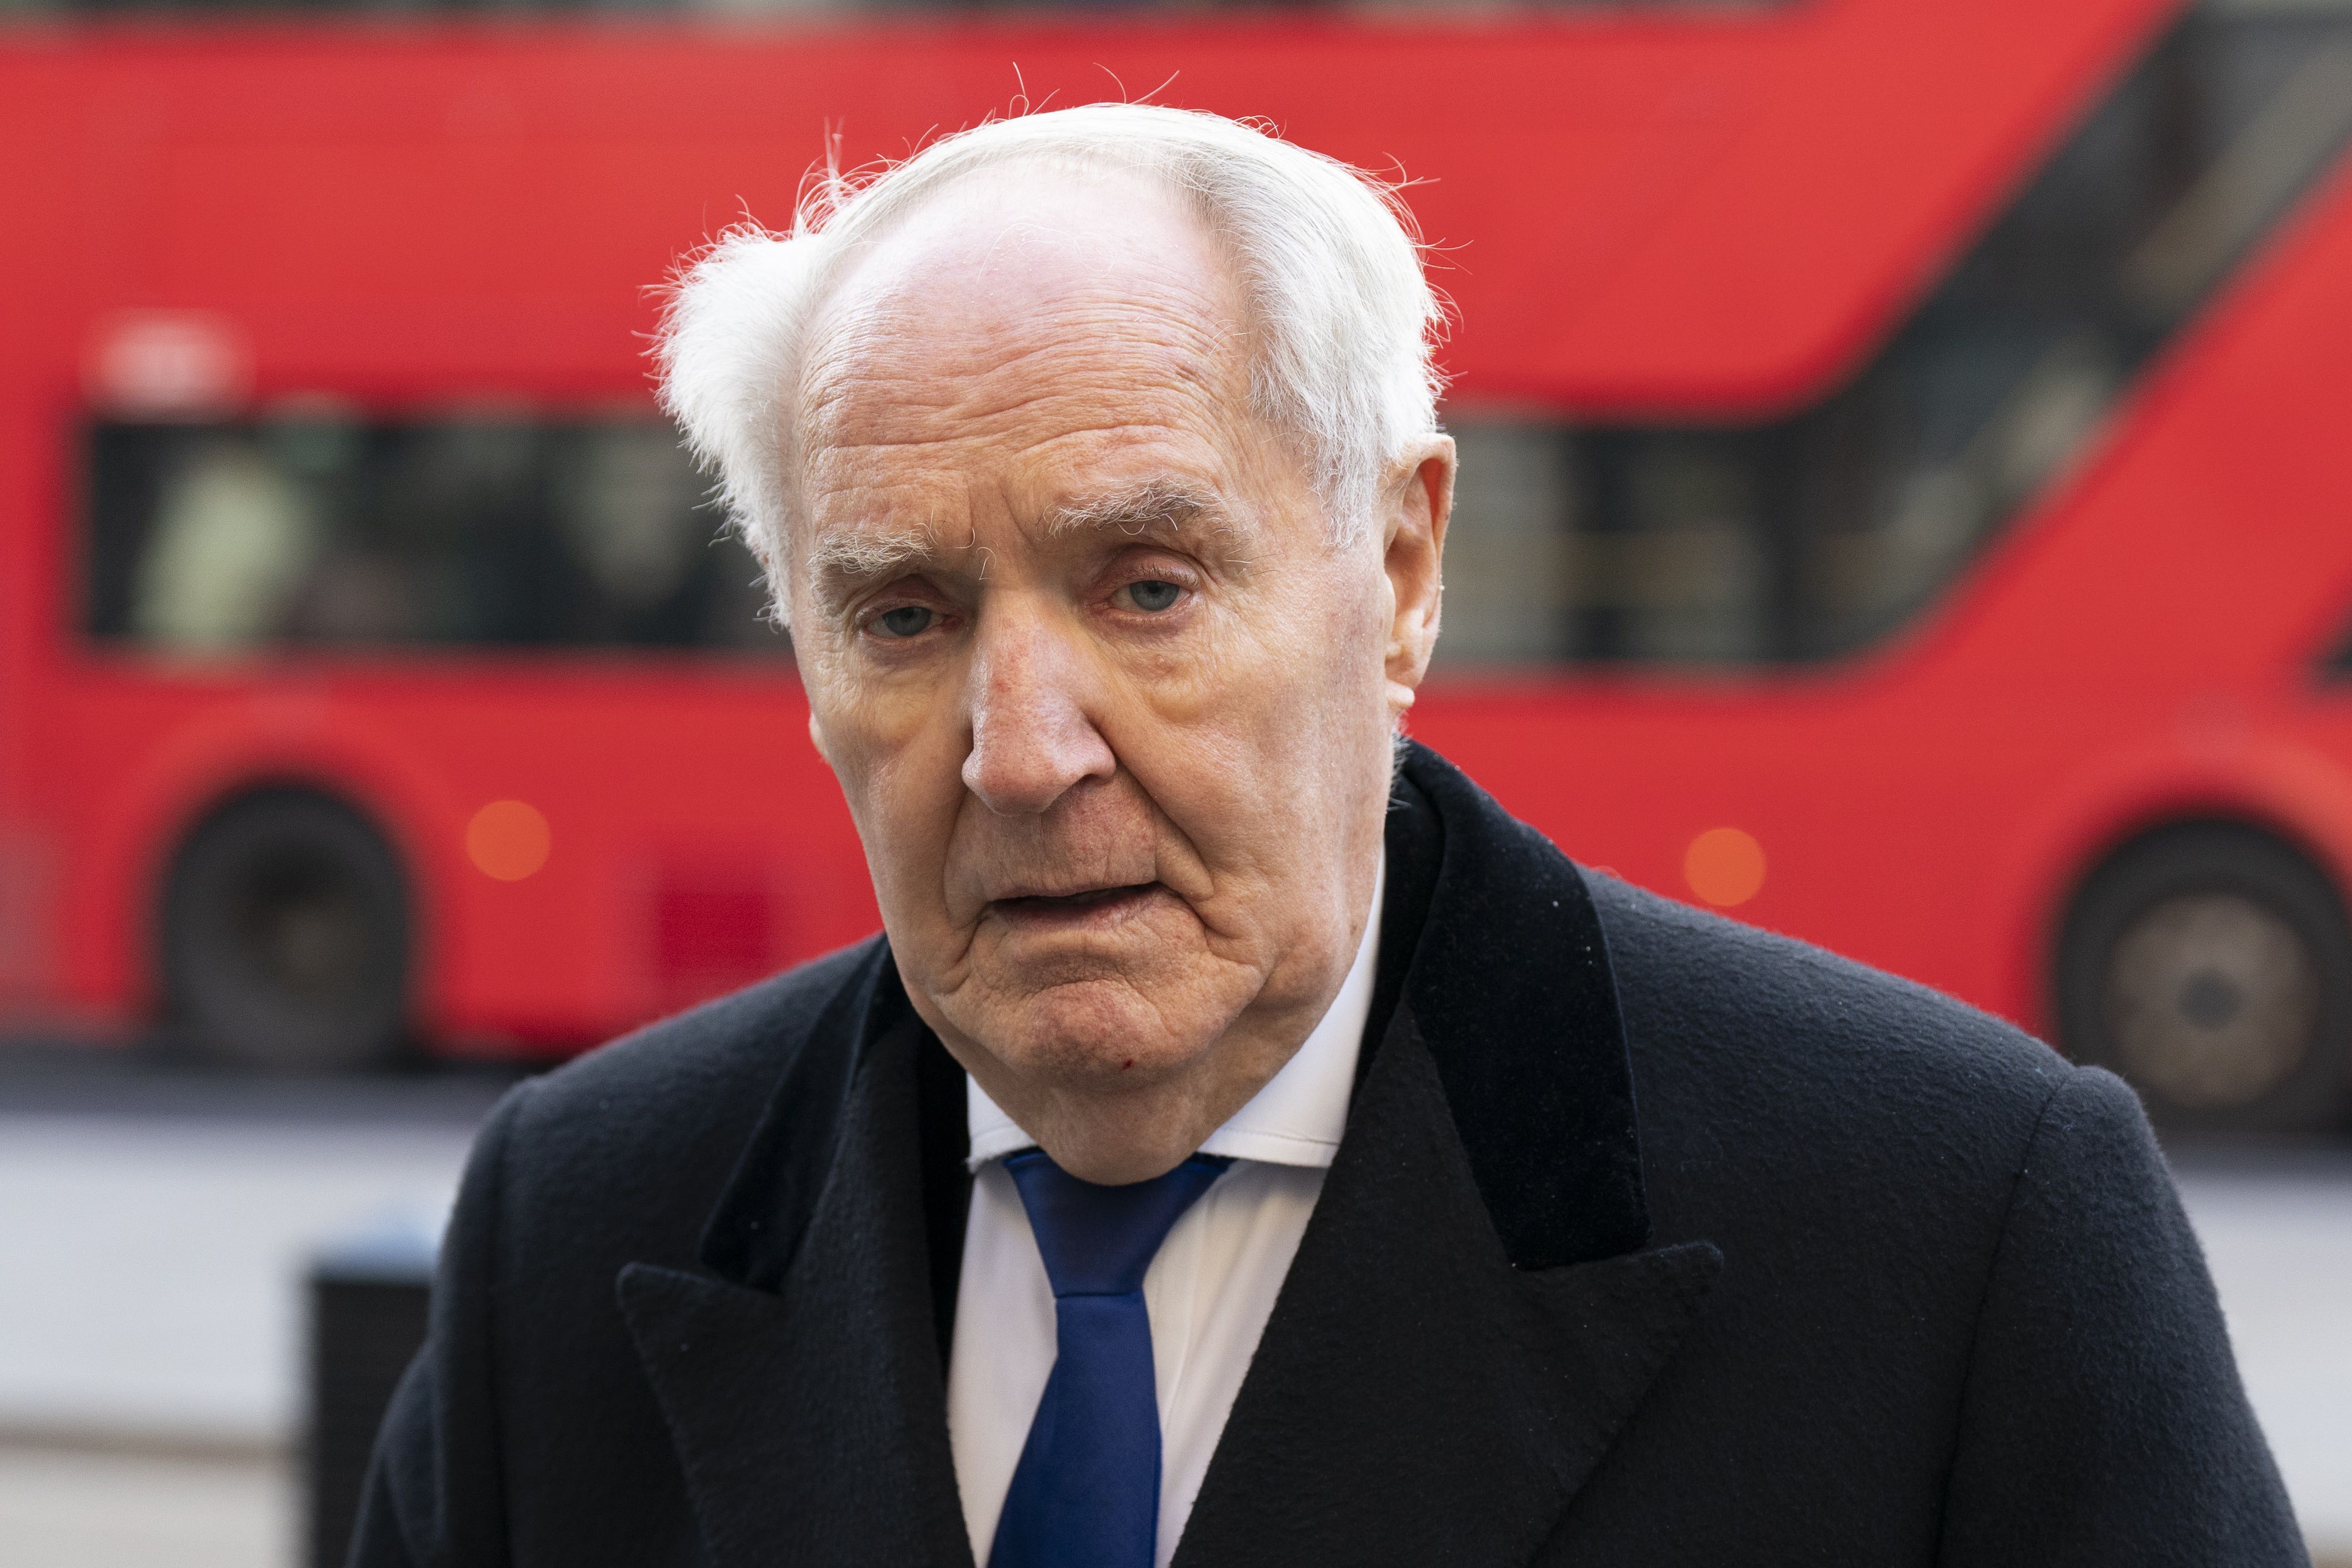 Sir Frederick Barclay arriving at the Royal Courts Of Justice, central London (Kirsty O’Connor/PA)